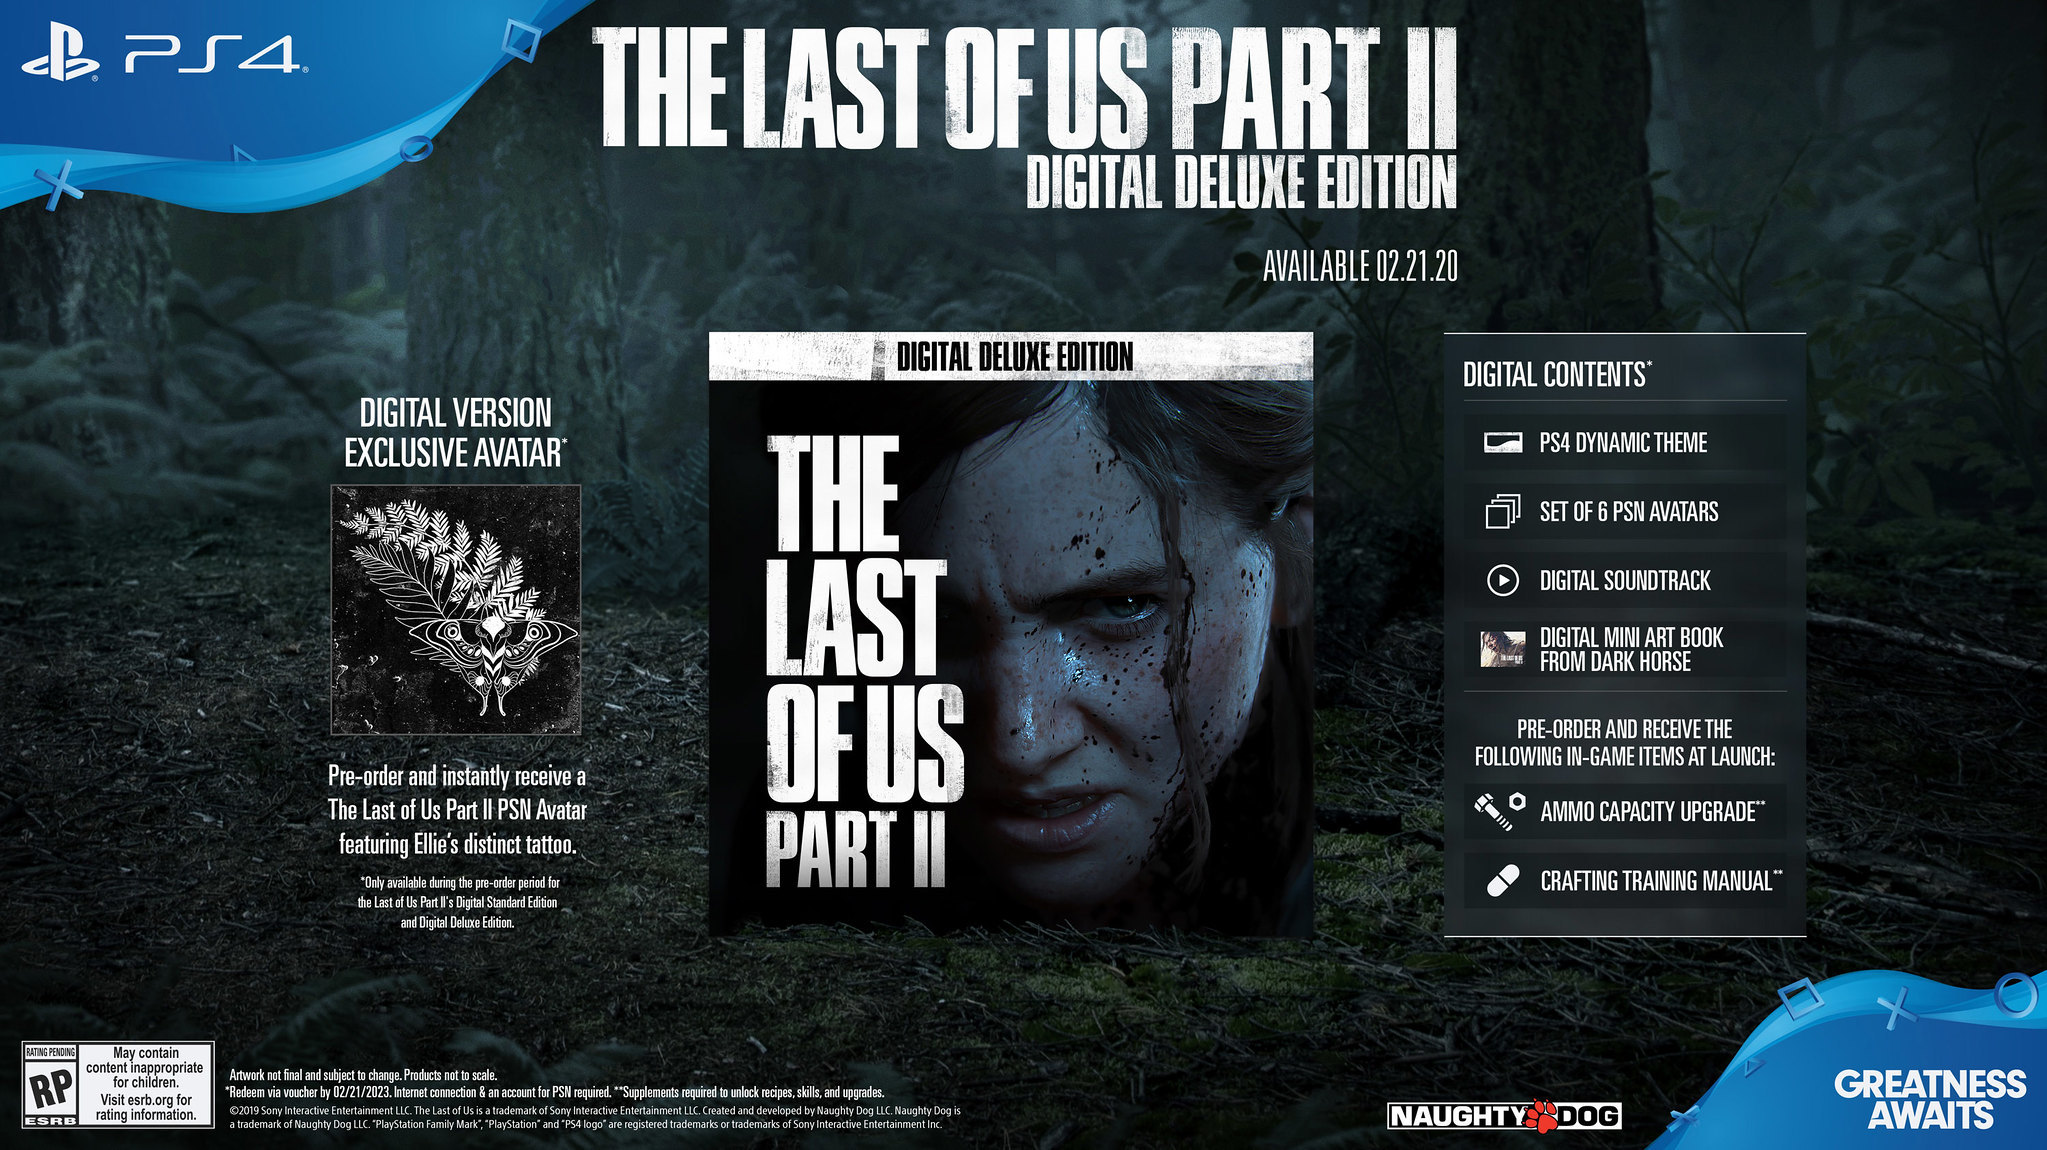 The Last of Us Part II 2 Ellie Edition Game Steelbook + Artbook + Thank You  Note